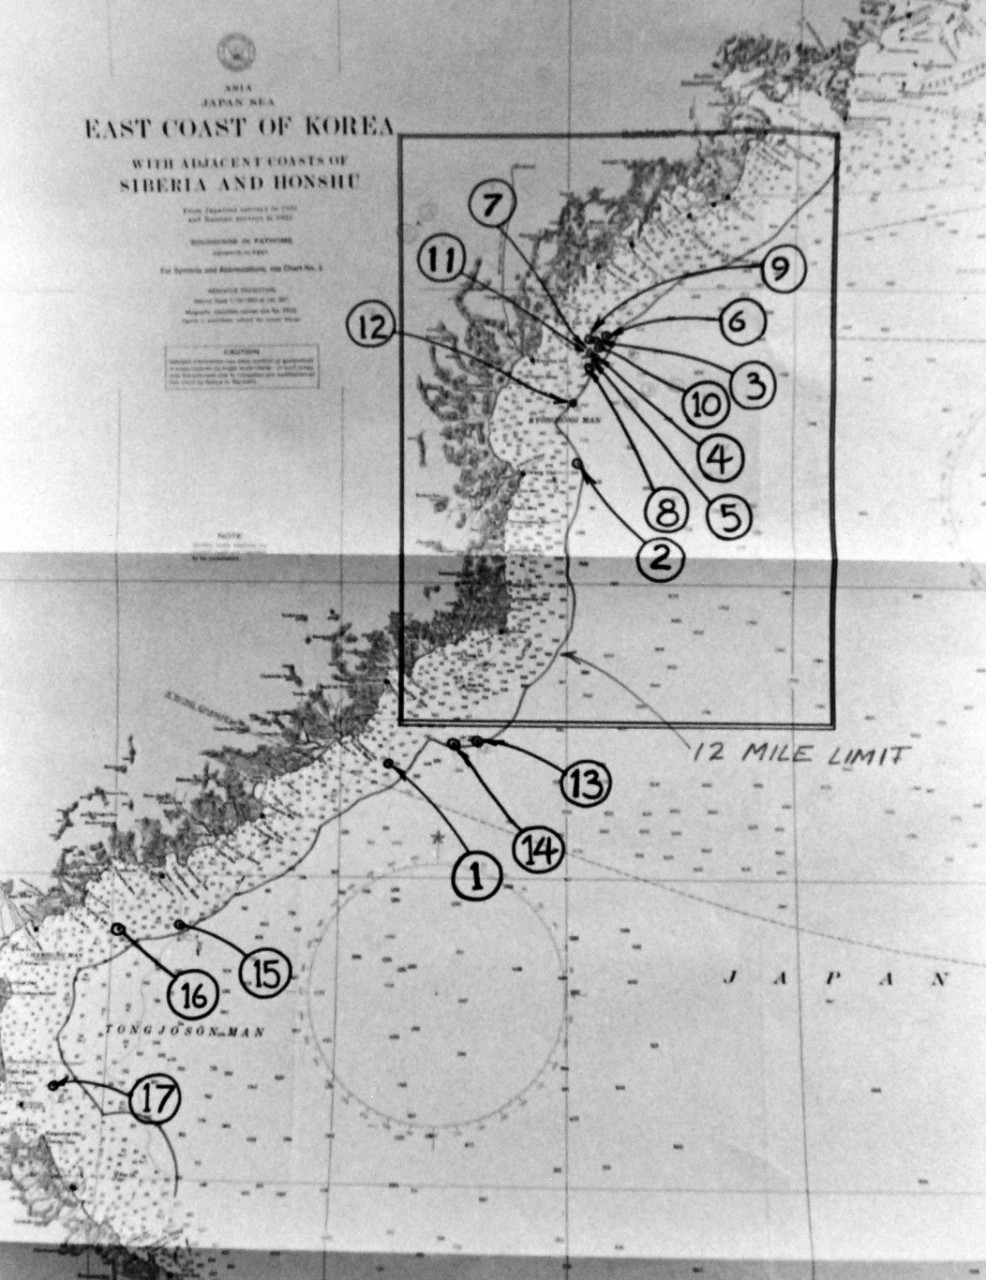 428-GX-USN-1140171:   USS Pueblo (AGER-2), chart.   Chart prepared for us by the Court of Inquiry on the capture of USS Pueblo (AGER-2).  The chart shows the alleged 17 points of violation on the territorial waters claimed by the North Koreans during the period of capture on January 15-24, 1968.  Captain Lloyd M. Bucher, Commanding Officer of Pueblo, denied each alleged violation, January 1969.   Official U.S. Navy Photograph, now in the collections of the National Archives.  (2017/05/23).  Photographed from reference card.  